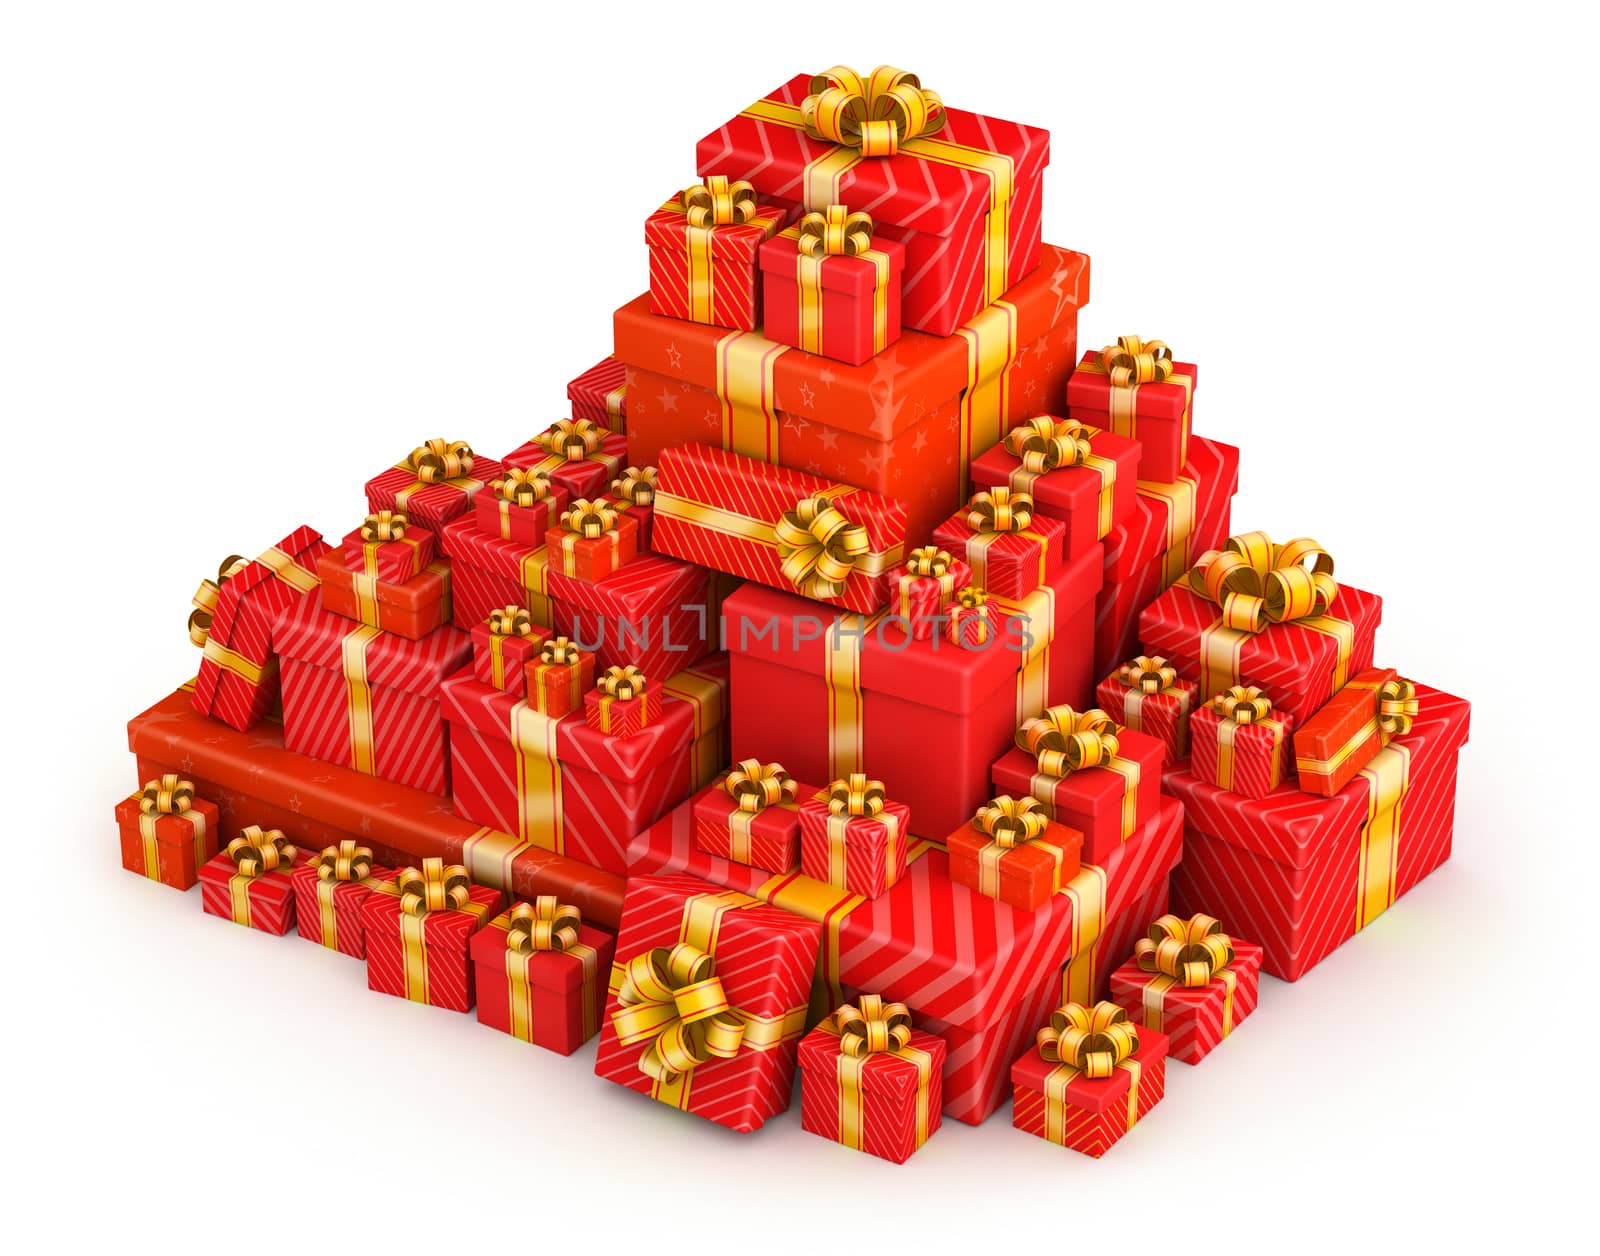 Pyramid pile of red gift box with yellow ribbons